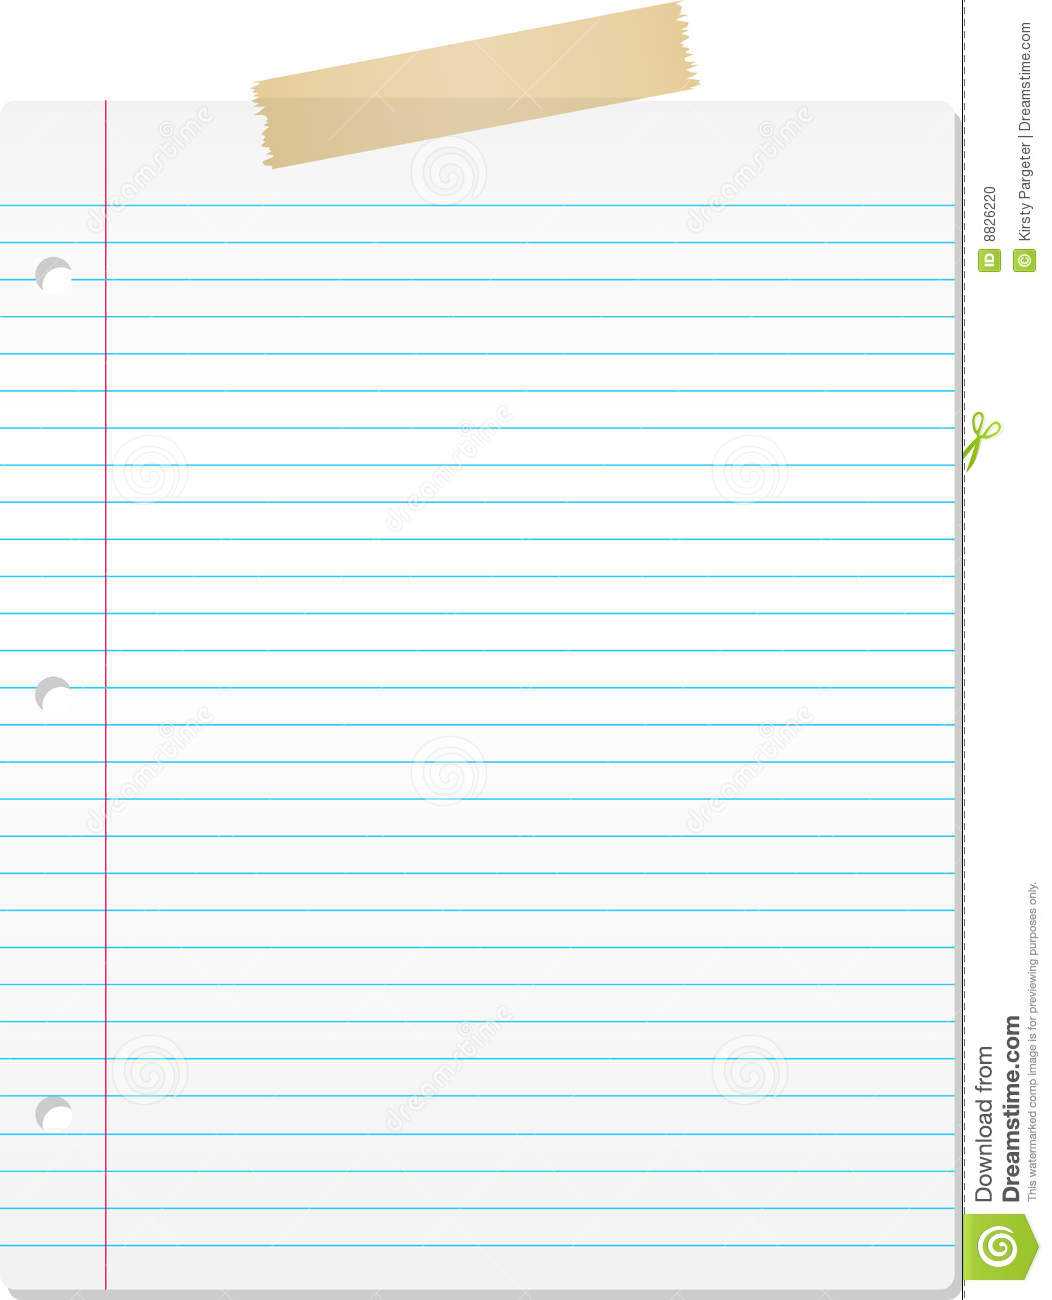 Lined Paper Stock Vector. Illustration Of Supplies, Masking Intended For Microsoft Word Lined Paper Template